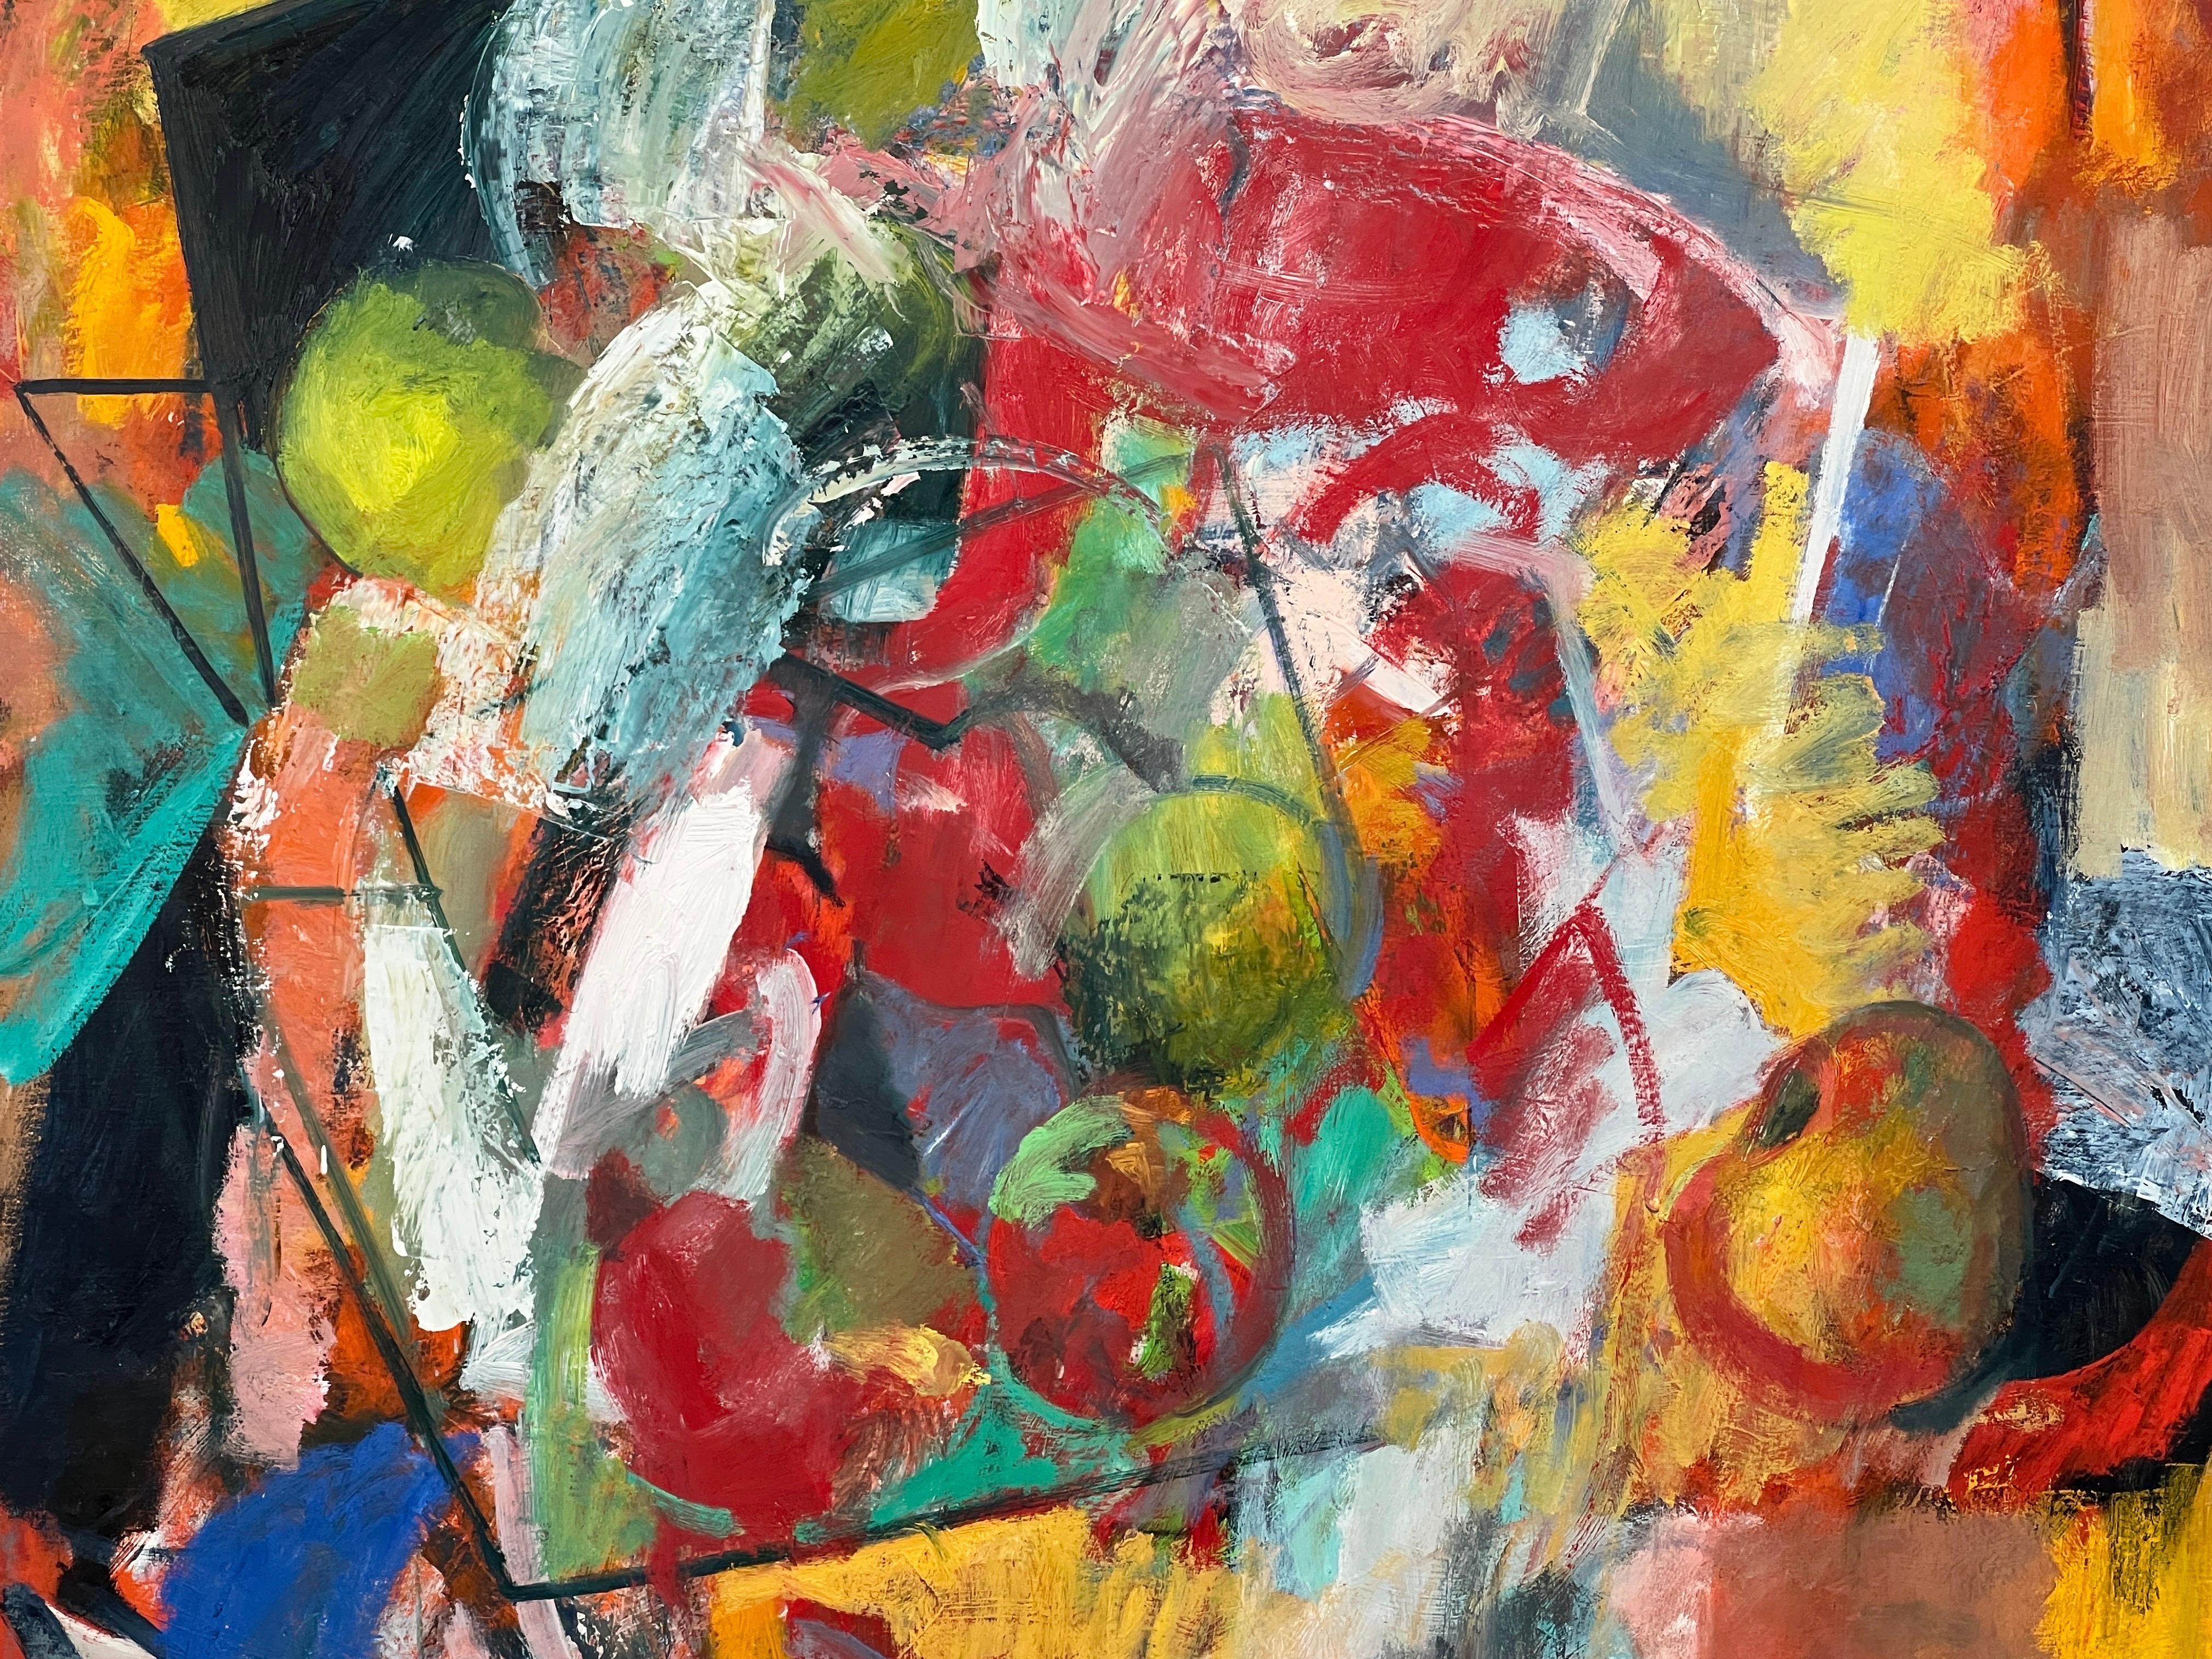 American Cezanne's Apple, Abstract Expressionist Painting by Paul Russotto -  For Sale